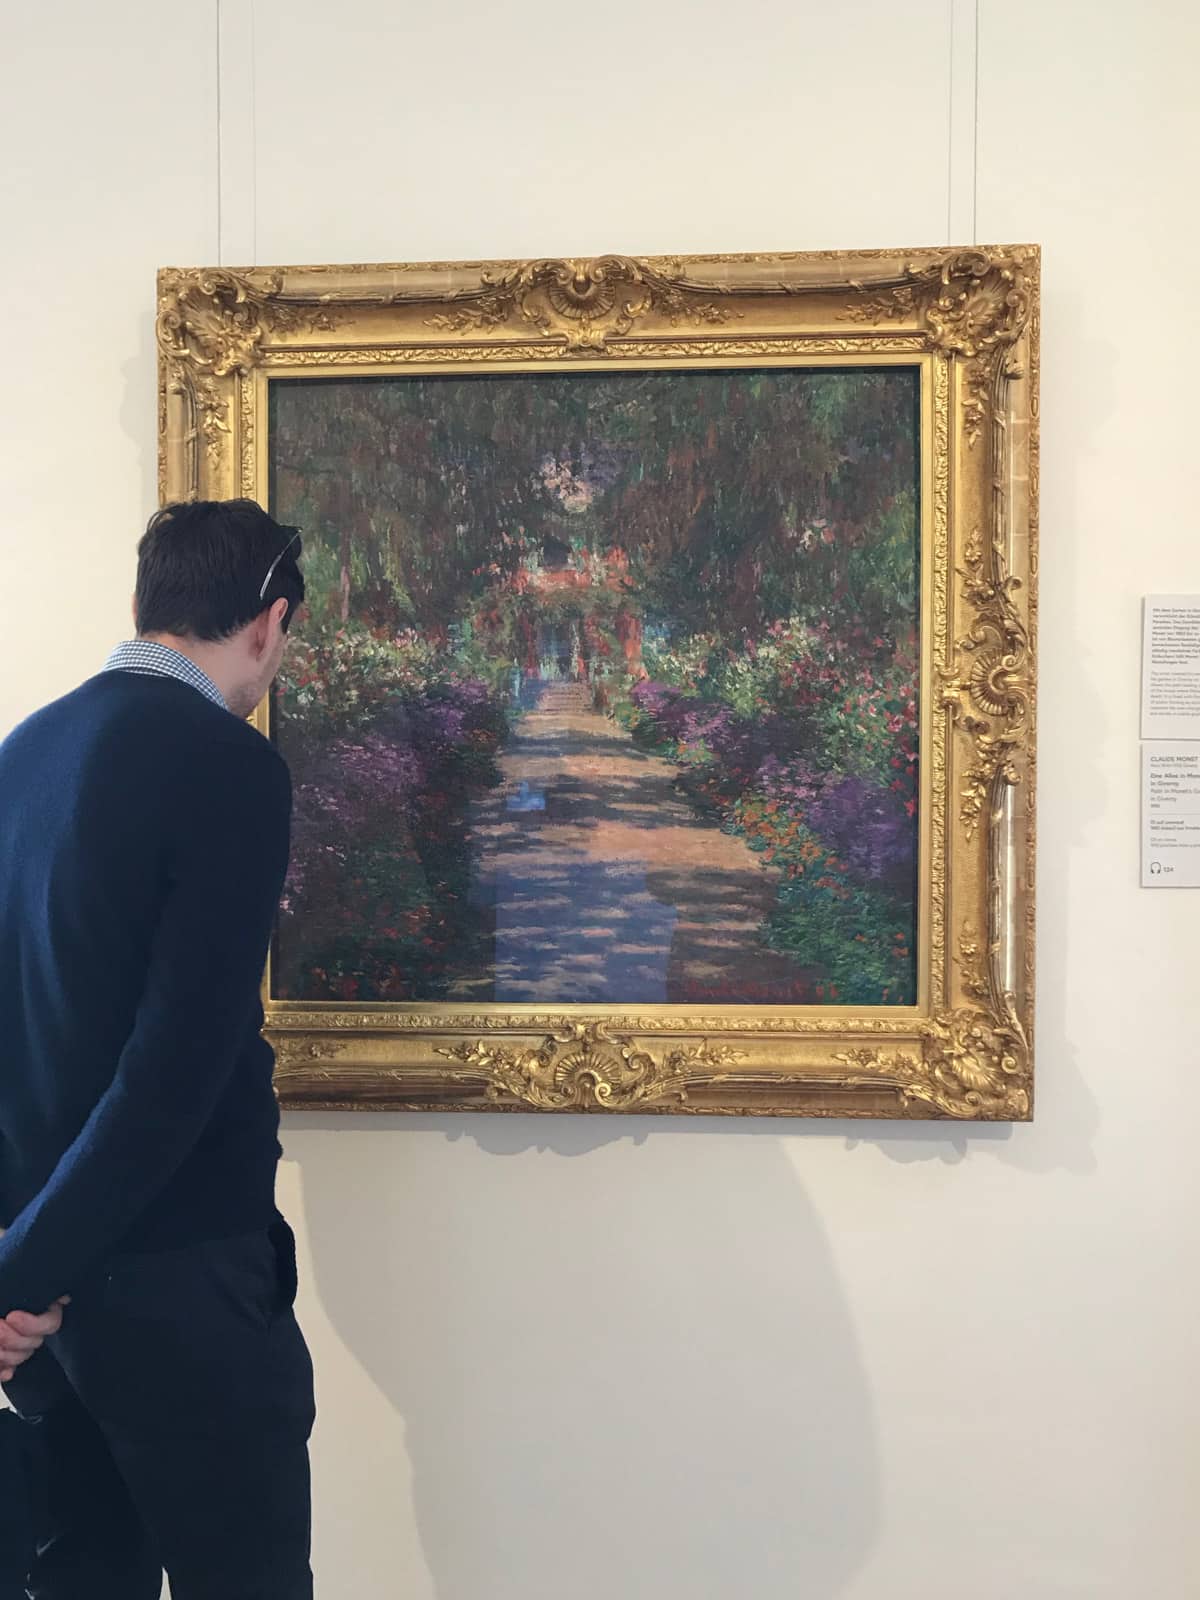 A man with dark hair wearing a blue sweater, analysing a painting in a gold frame that is on display on a wall in a gallery. The painting resembles flowers and has many colours